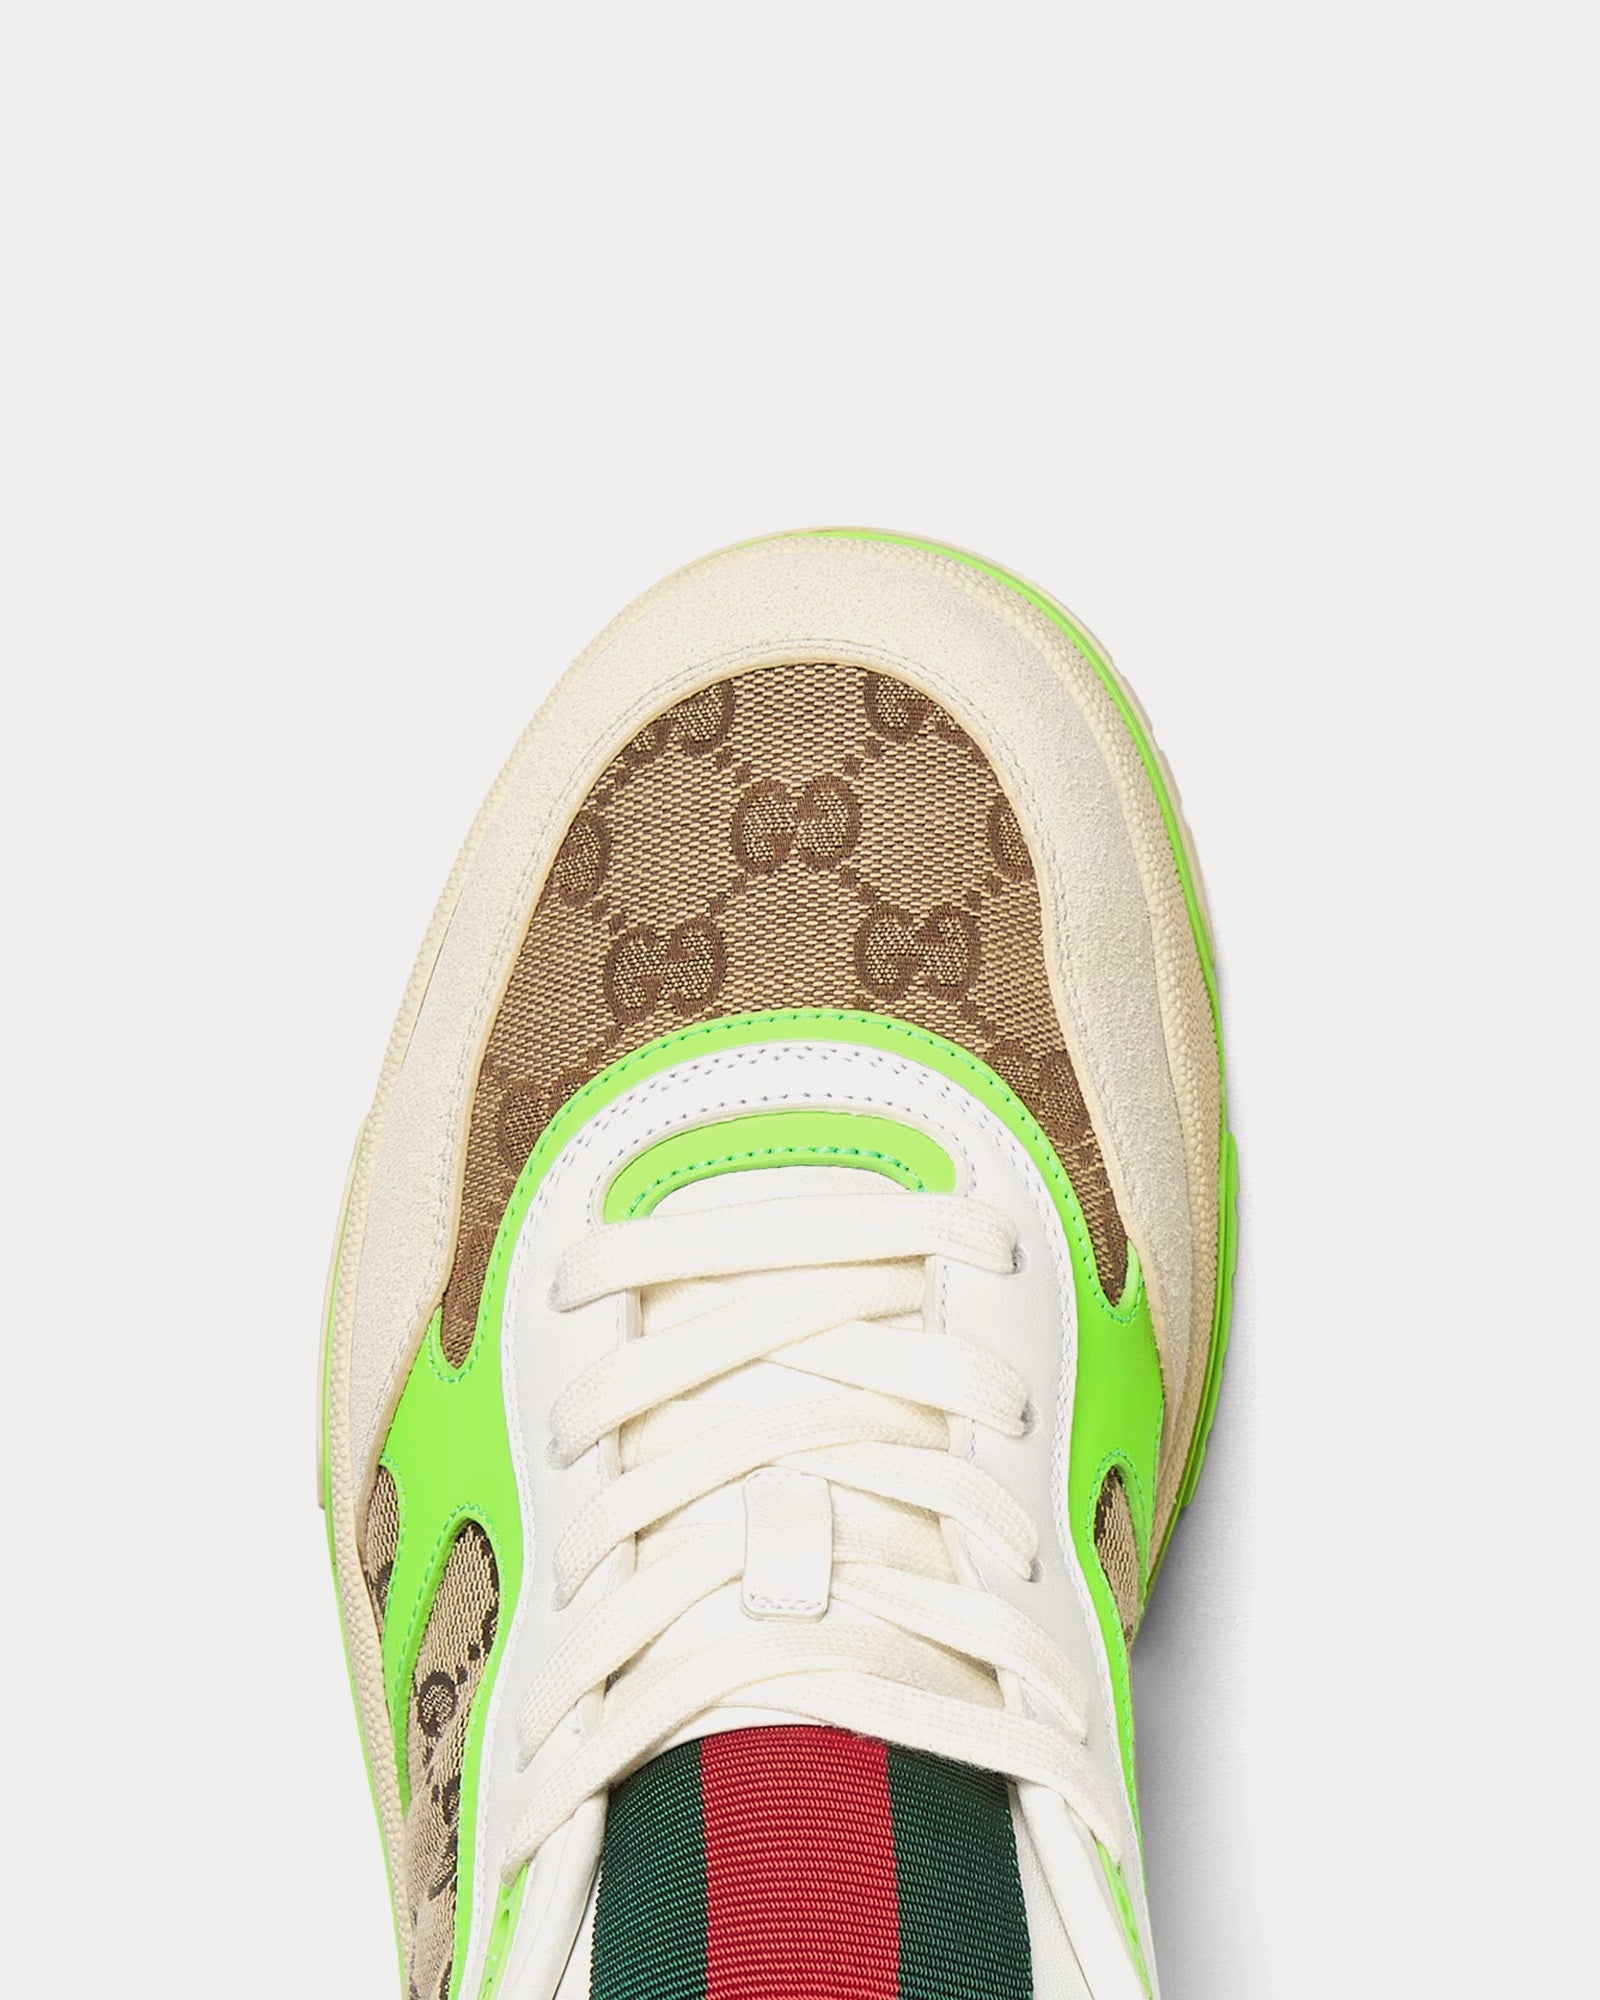 Gucci - Re-Web Leather with Original GG Canvas White / Green Low Top Sneakers